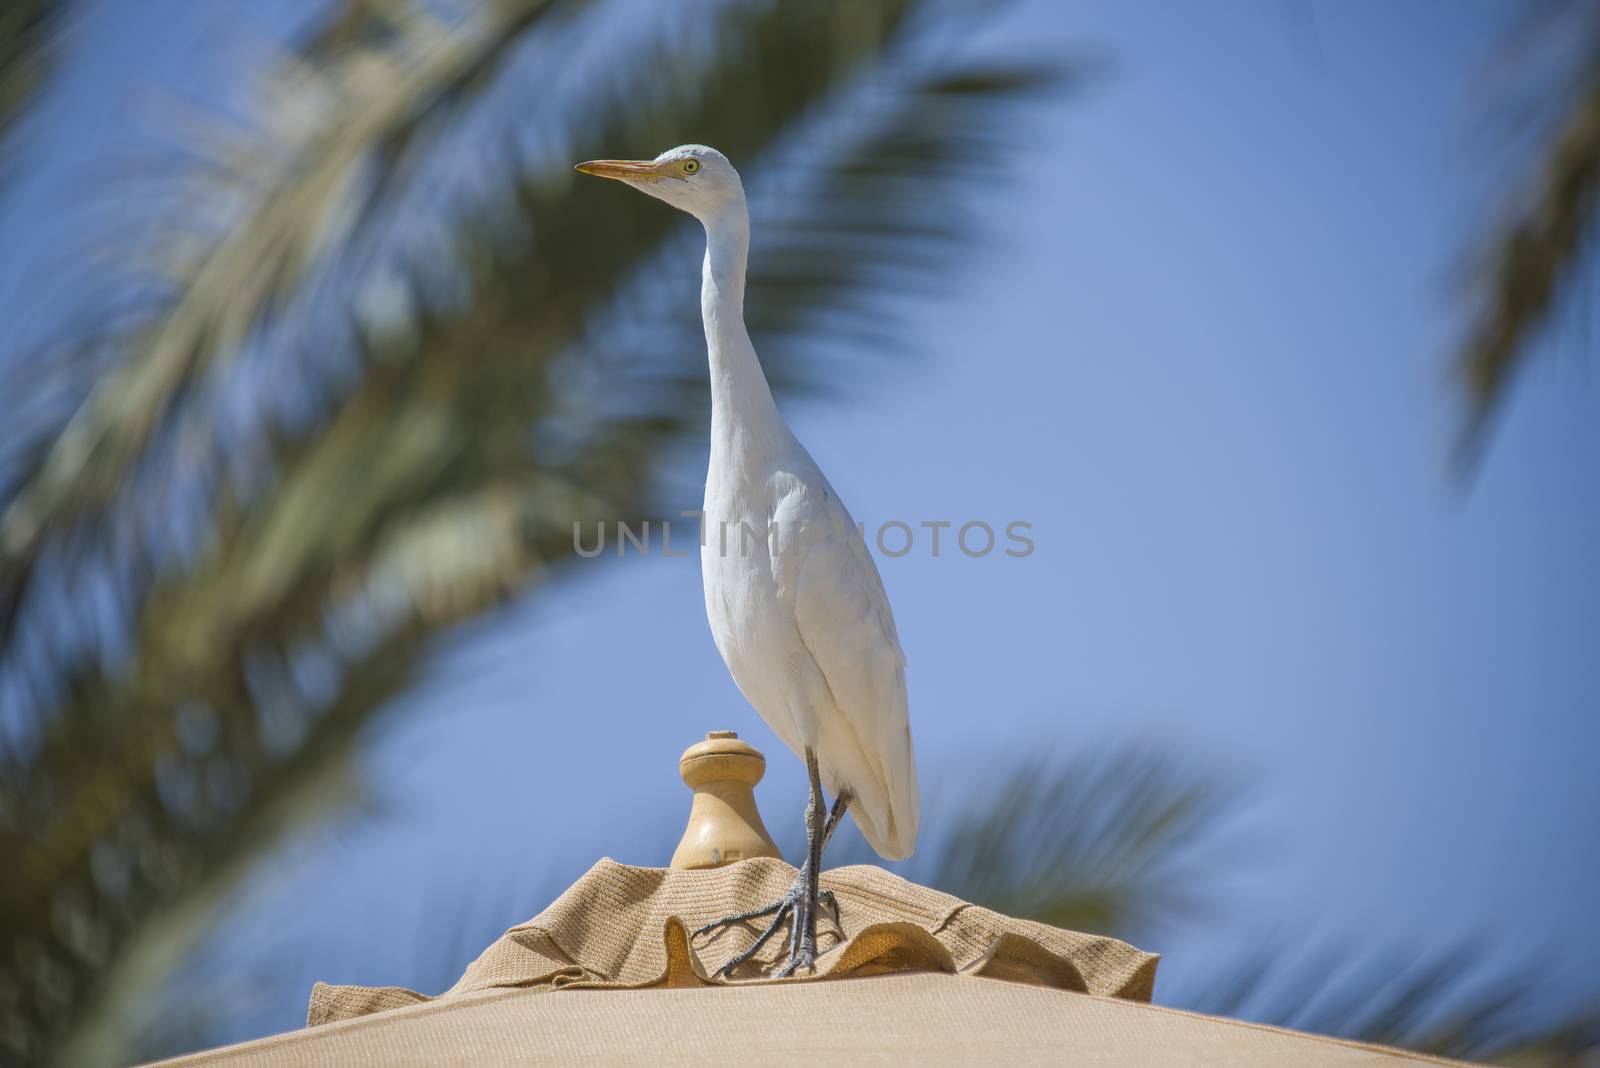 The Cattle Egret (Bubulcus ibis) is a cosmopolitan species of heron (family Ardeidae) found in the tropics, subtropics and warm temperate zones. The picture is shot in April 2013 while we were on holiday in Egypt, Sharm el Sheik.